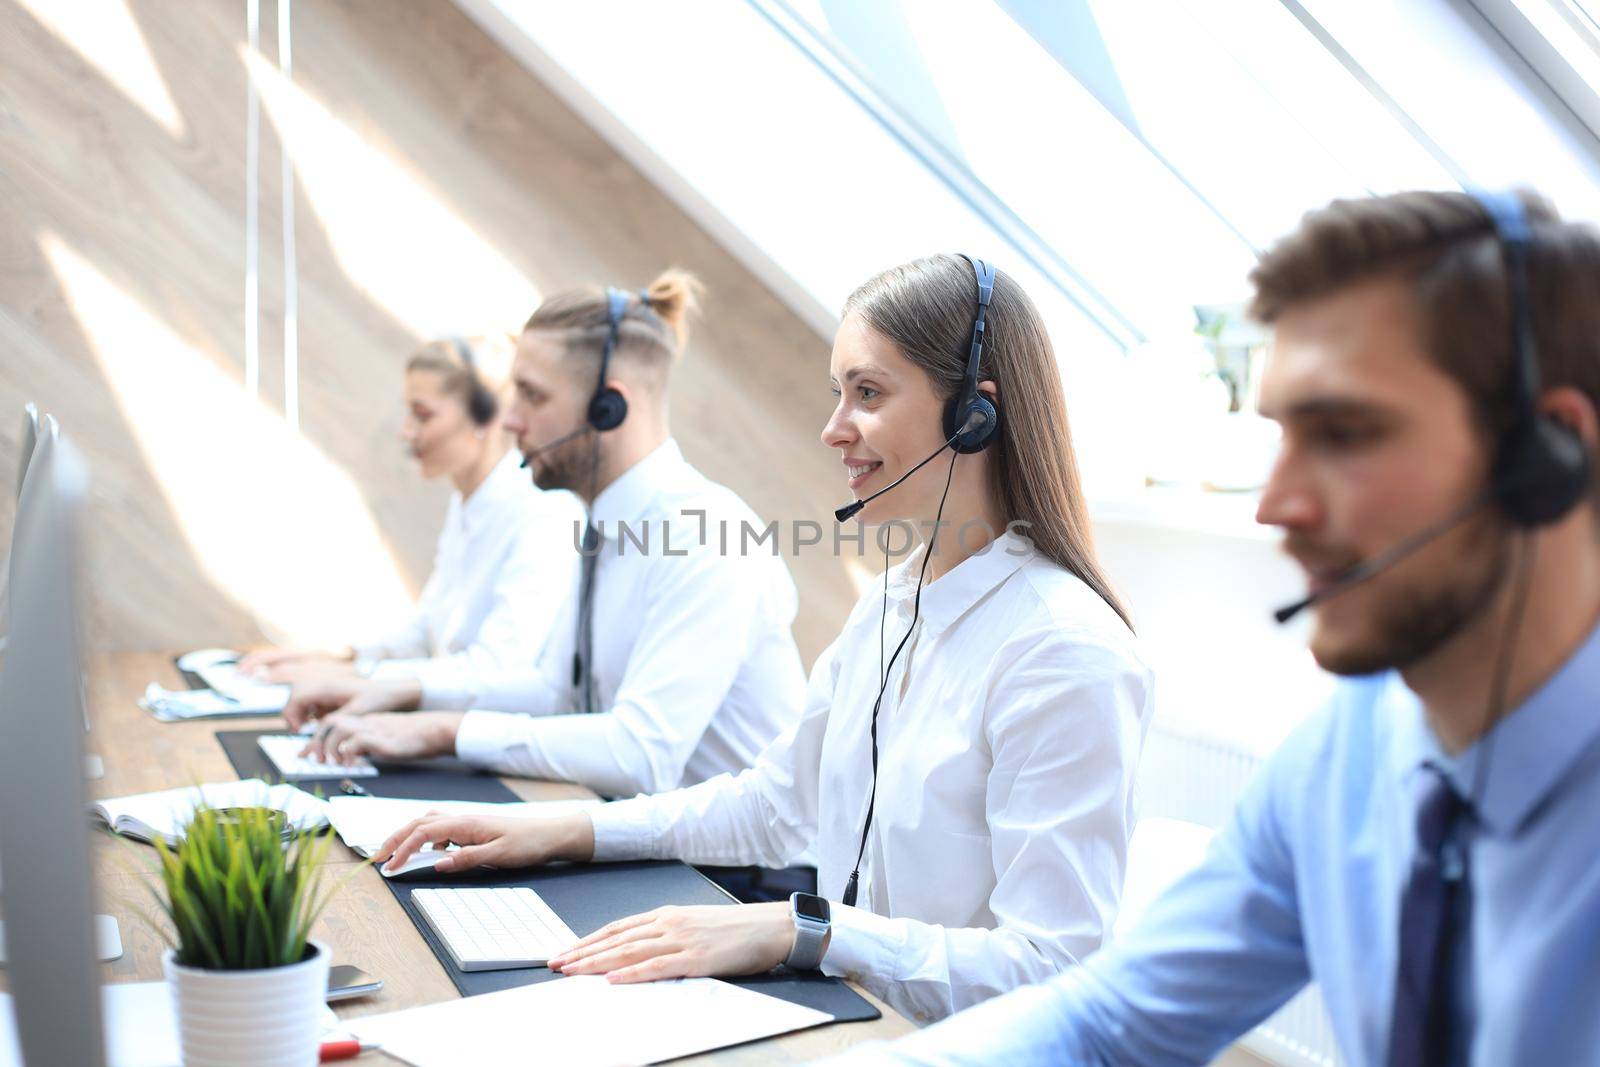 Female customer support operator with headset and smiling accompanied by her team